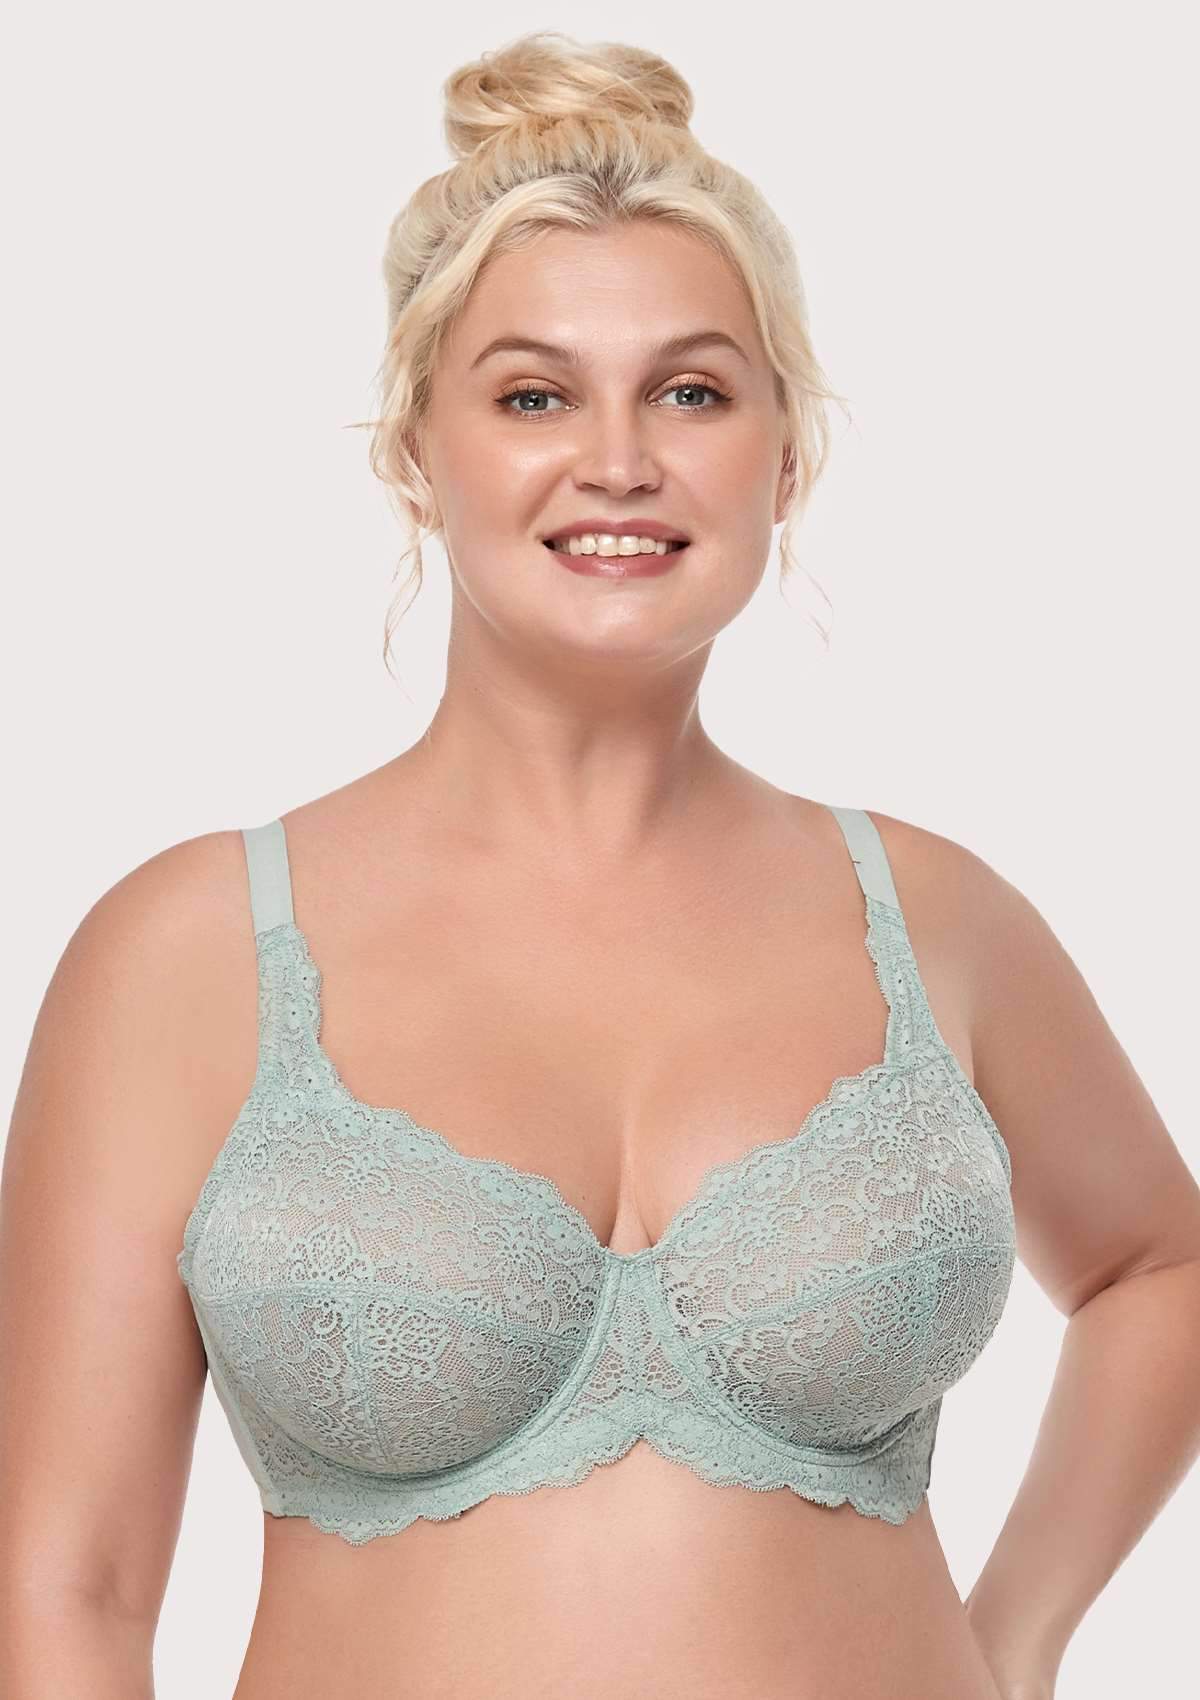 HSIA All-Over Floral Lace: Best Bra For Elderly With Sagging Breasts - Crystal Blue / 44 / D